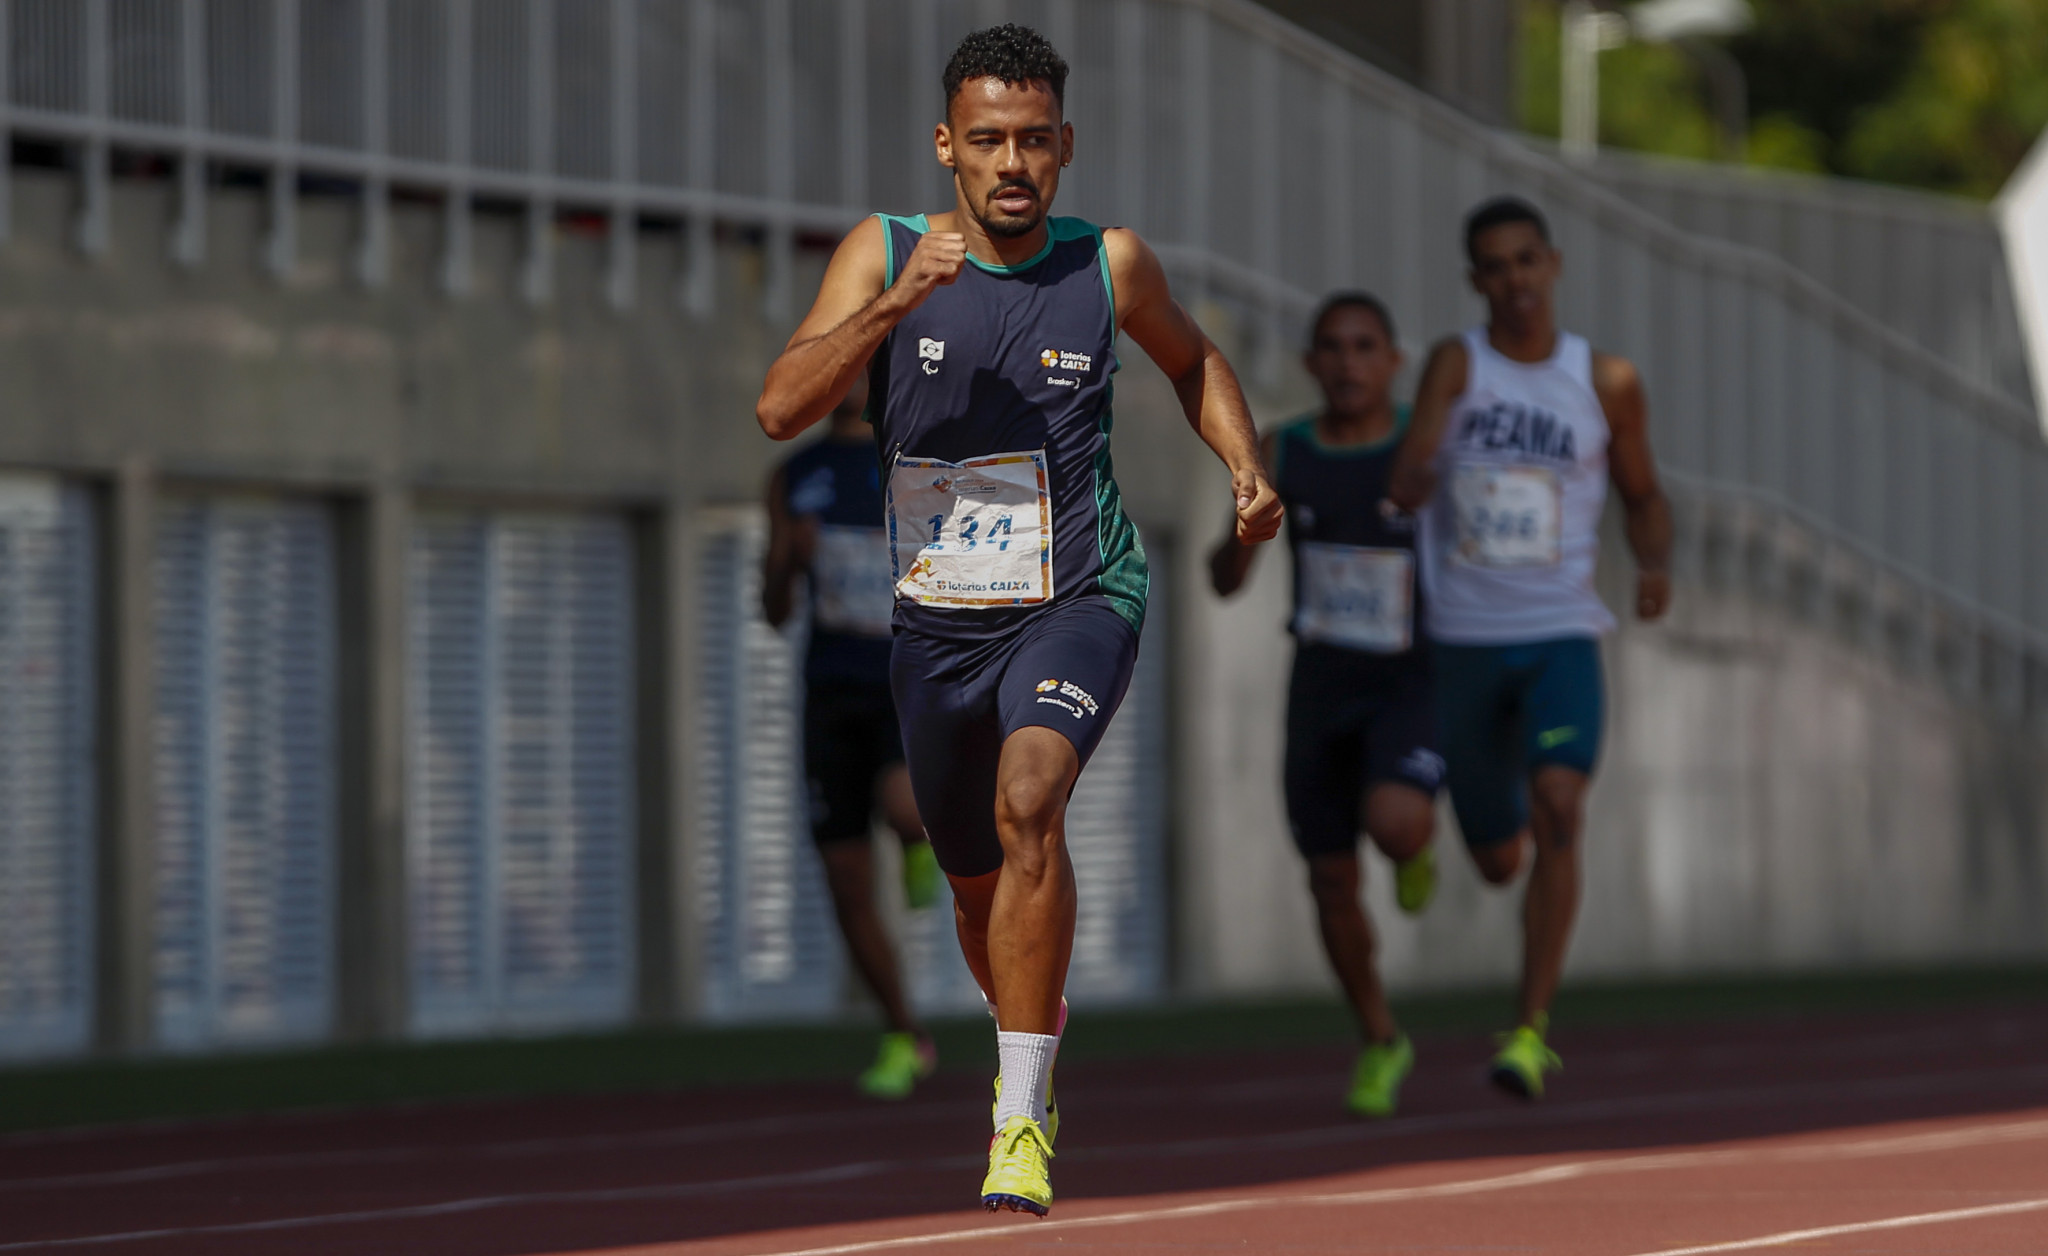 Brazilian runner Martins wins Americas Paralympic Committee award for April